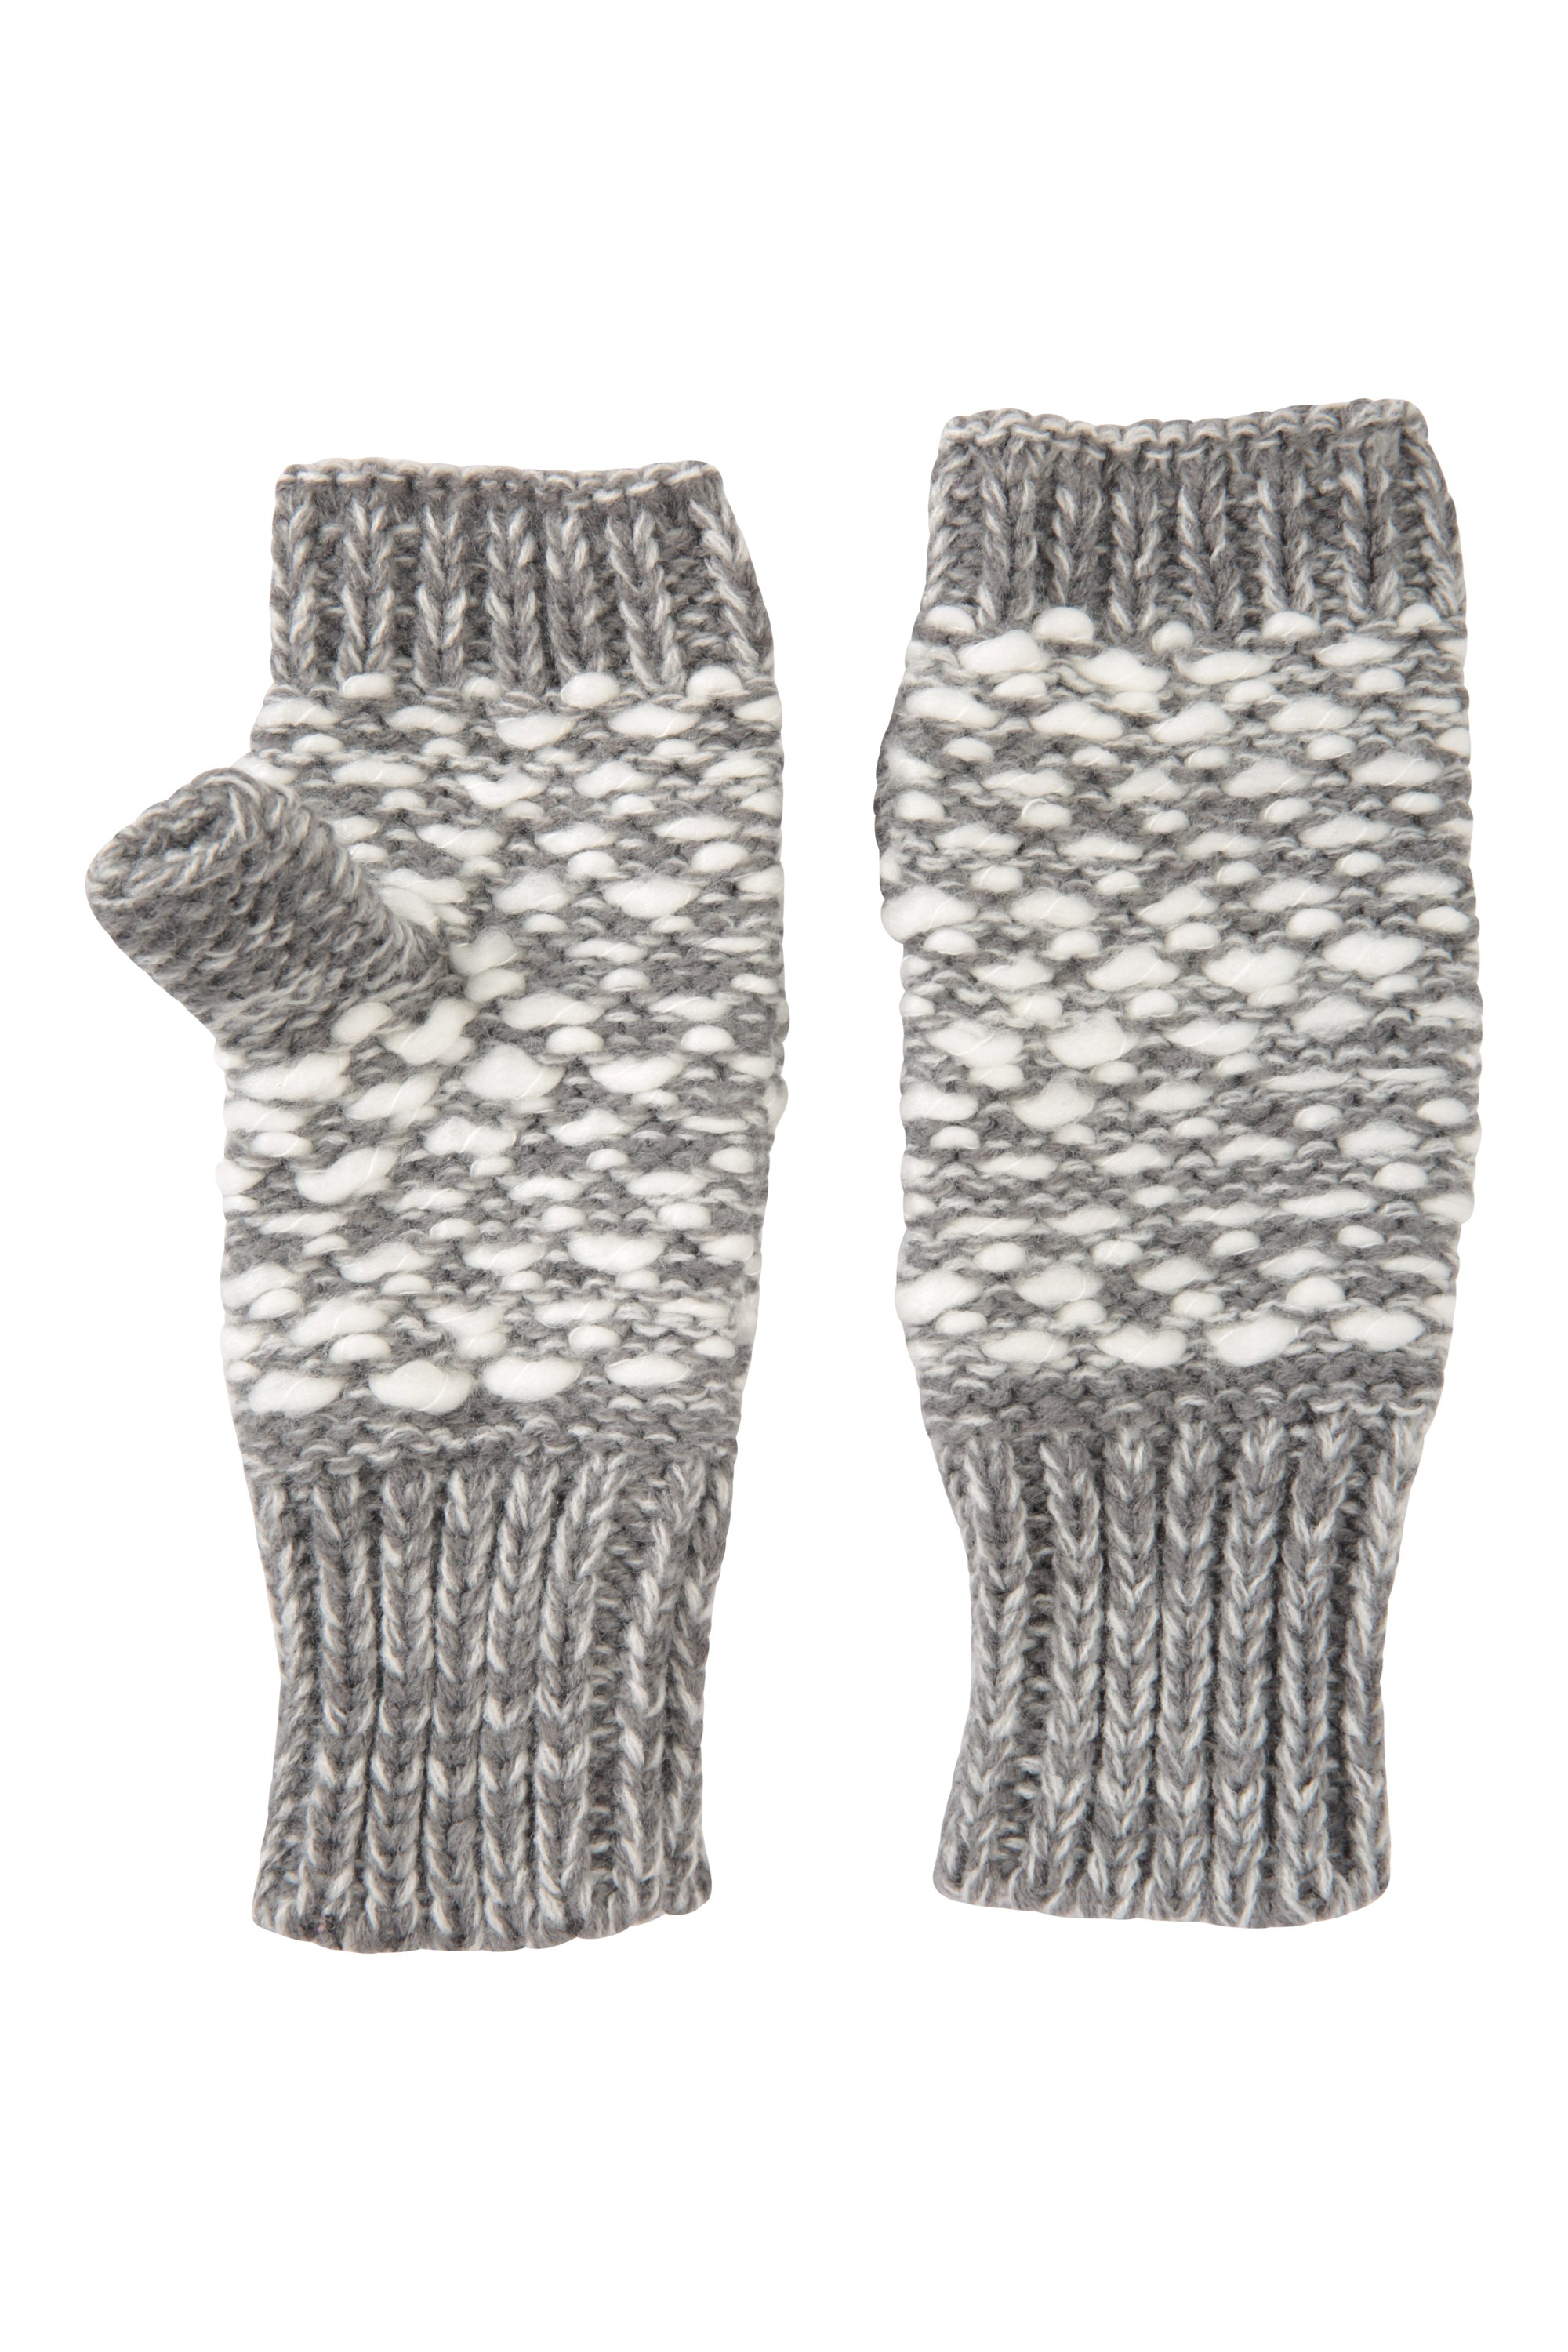 Patterned Fingerless Knitted Womens Mittens - Grey